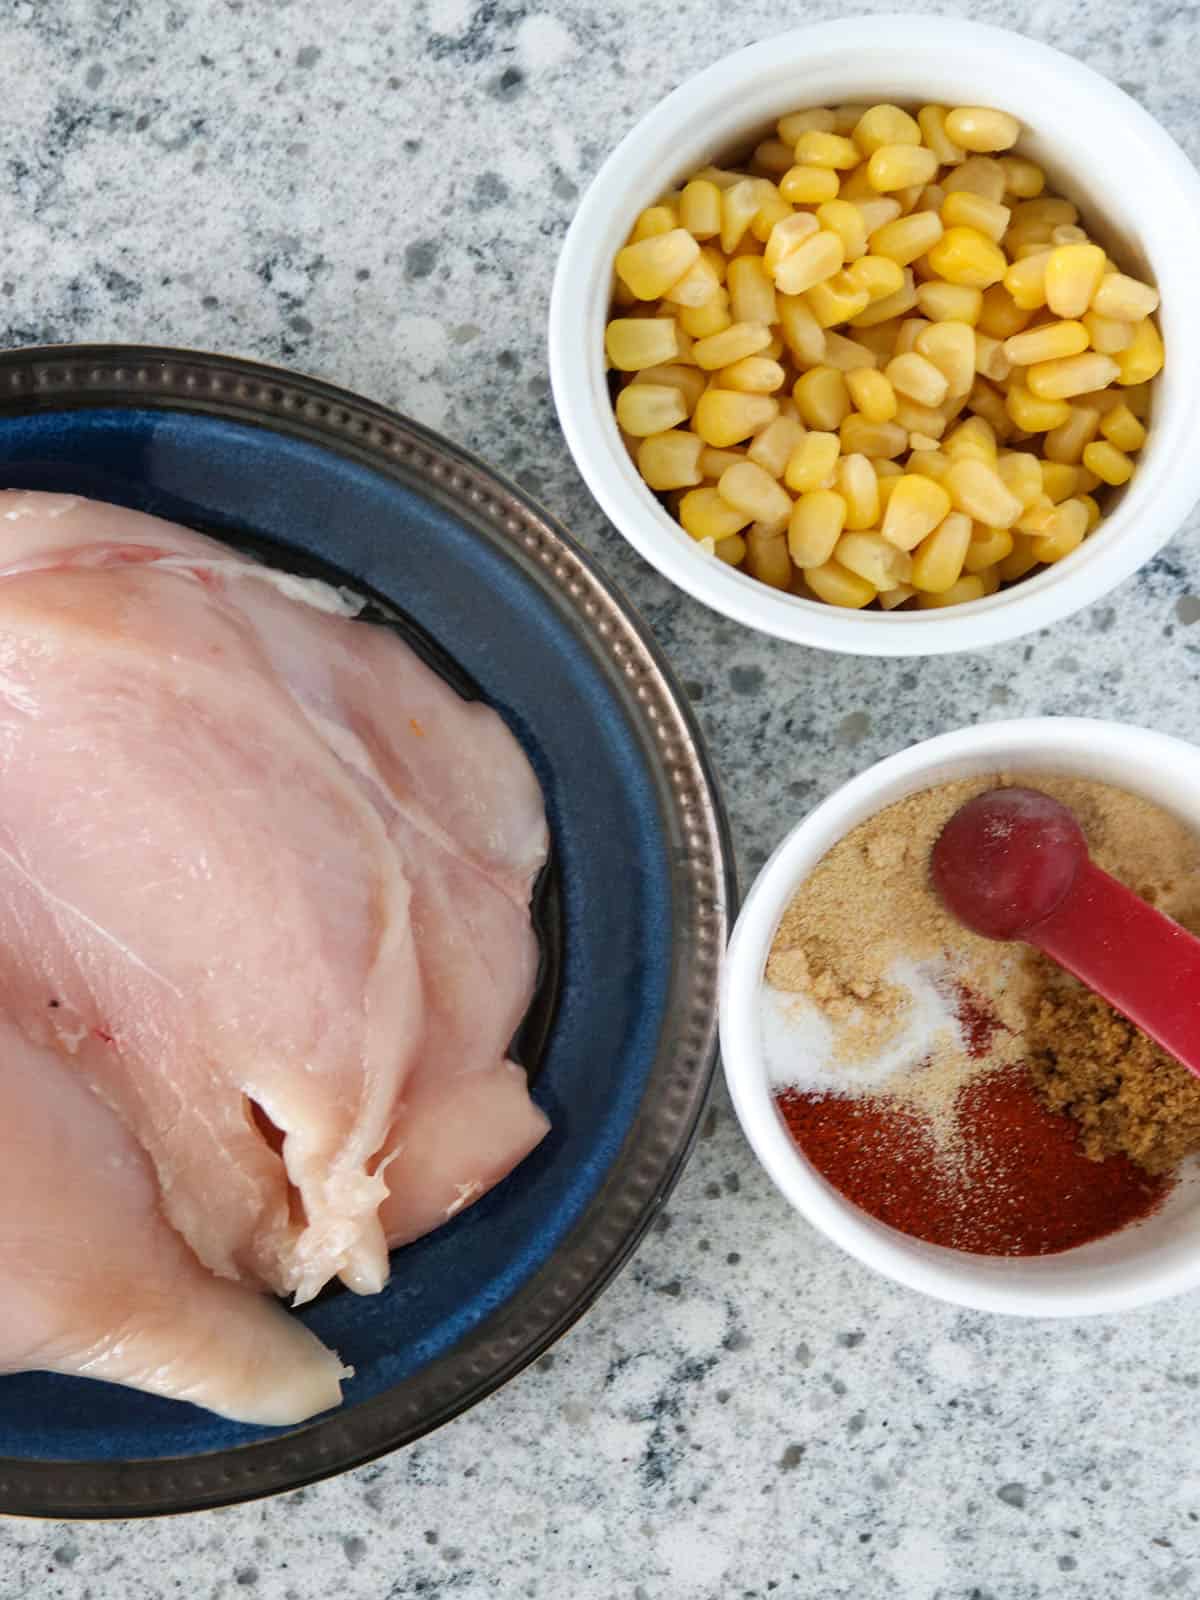 The ingredients for the Cajun Chicken.